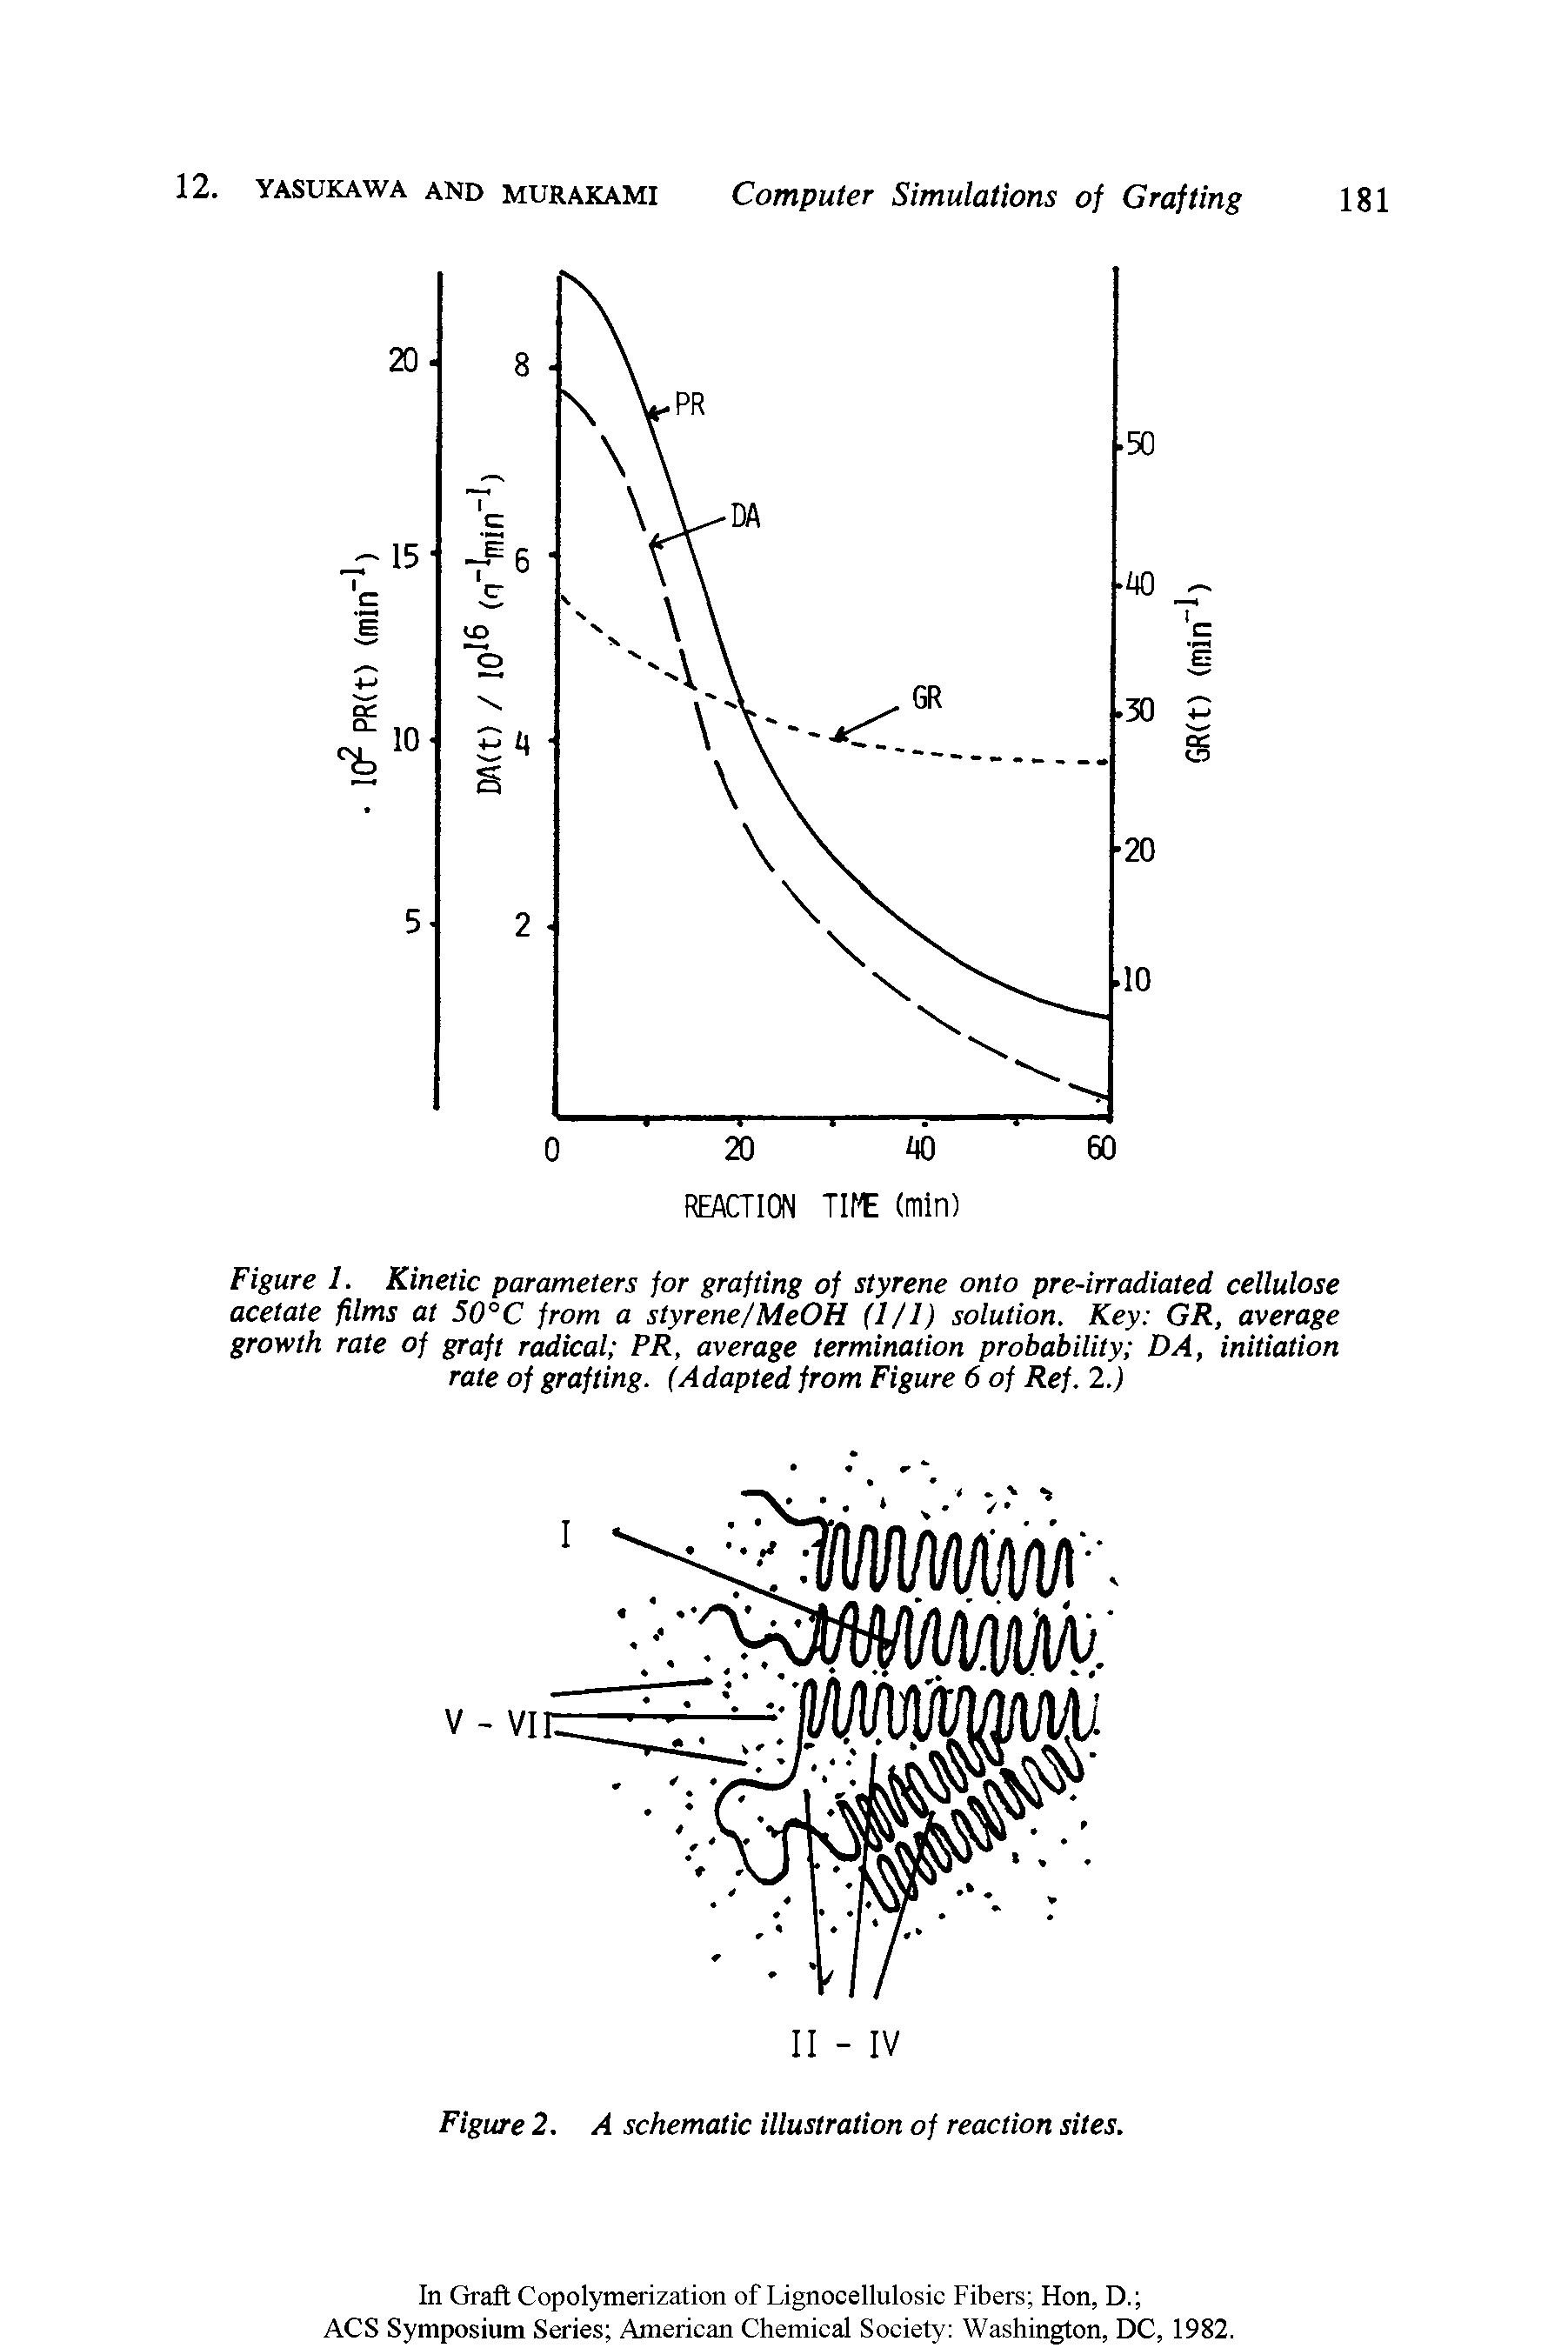 Figure 1. Kinetic parameters for grafting of styrene onto pre-irradiated cellulose acetate films at 50°C from a styrene/MeOH (1/1) solution. Key GR, average growth rate of graft radical PR, average termination probability DA, initiation rate of grafting. (Adapted from Figure 6 of Ref. 2.)...